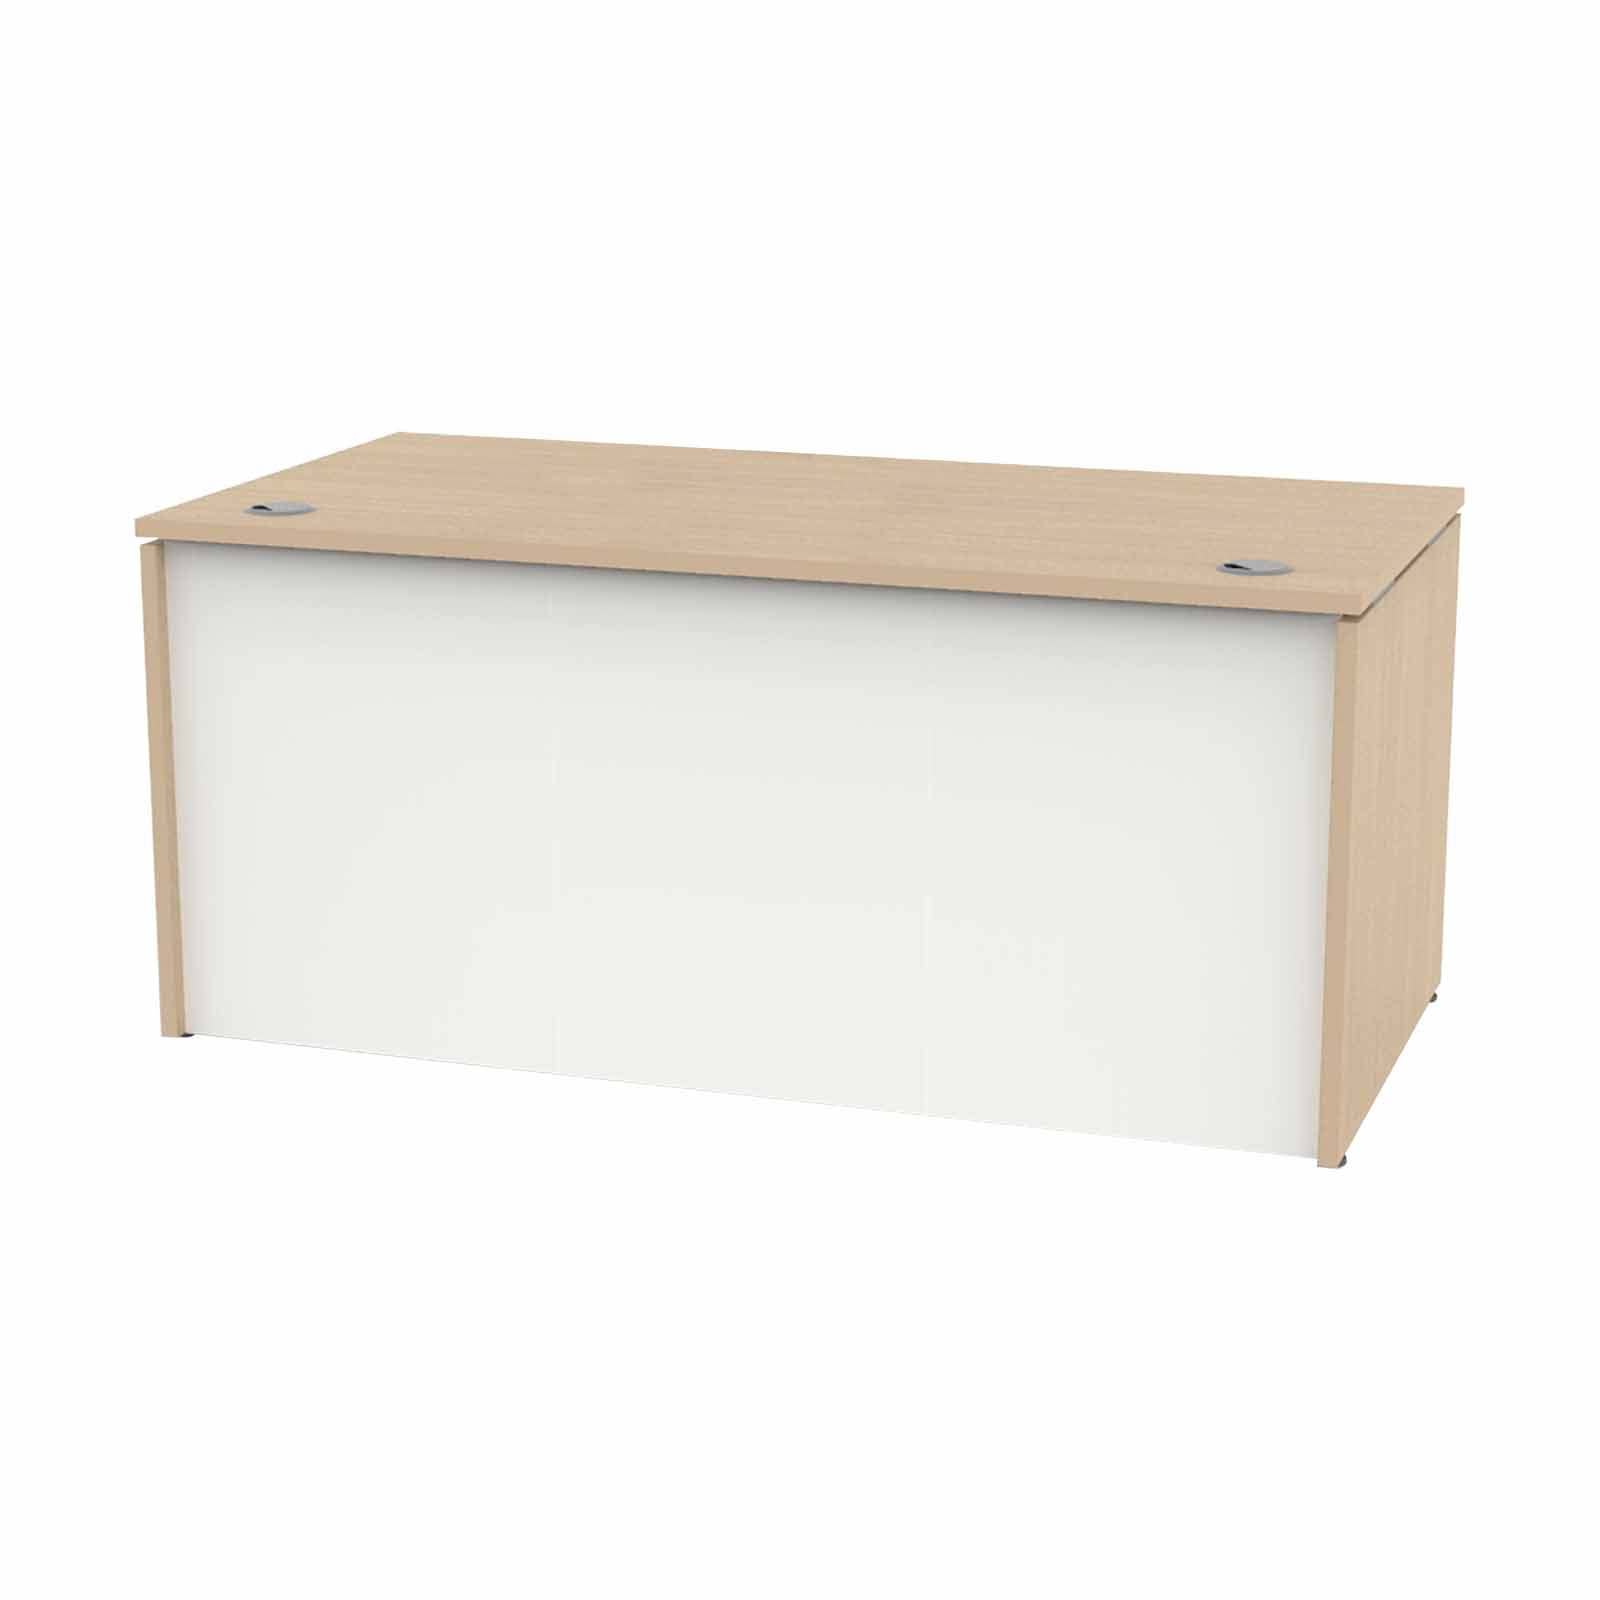 MADE TO ORDER Greeting Panel End Desk